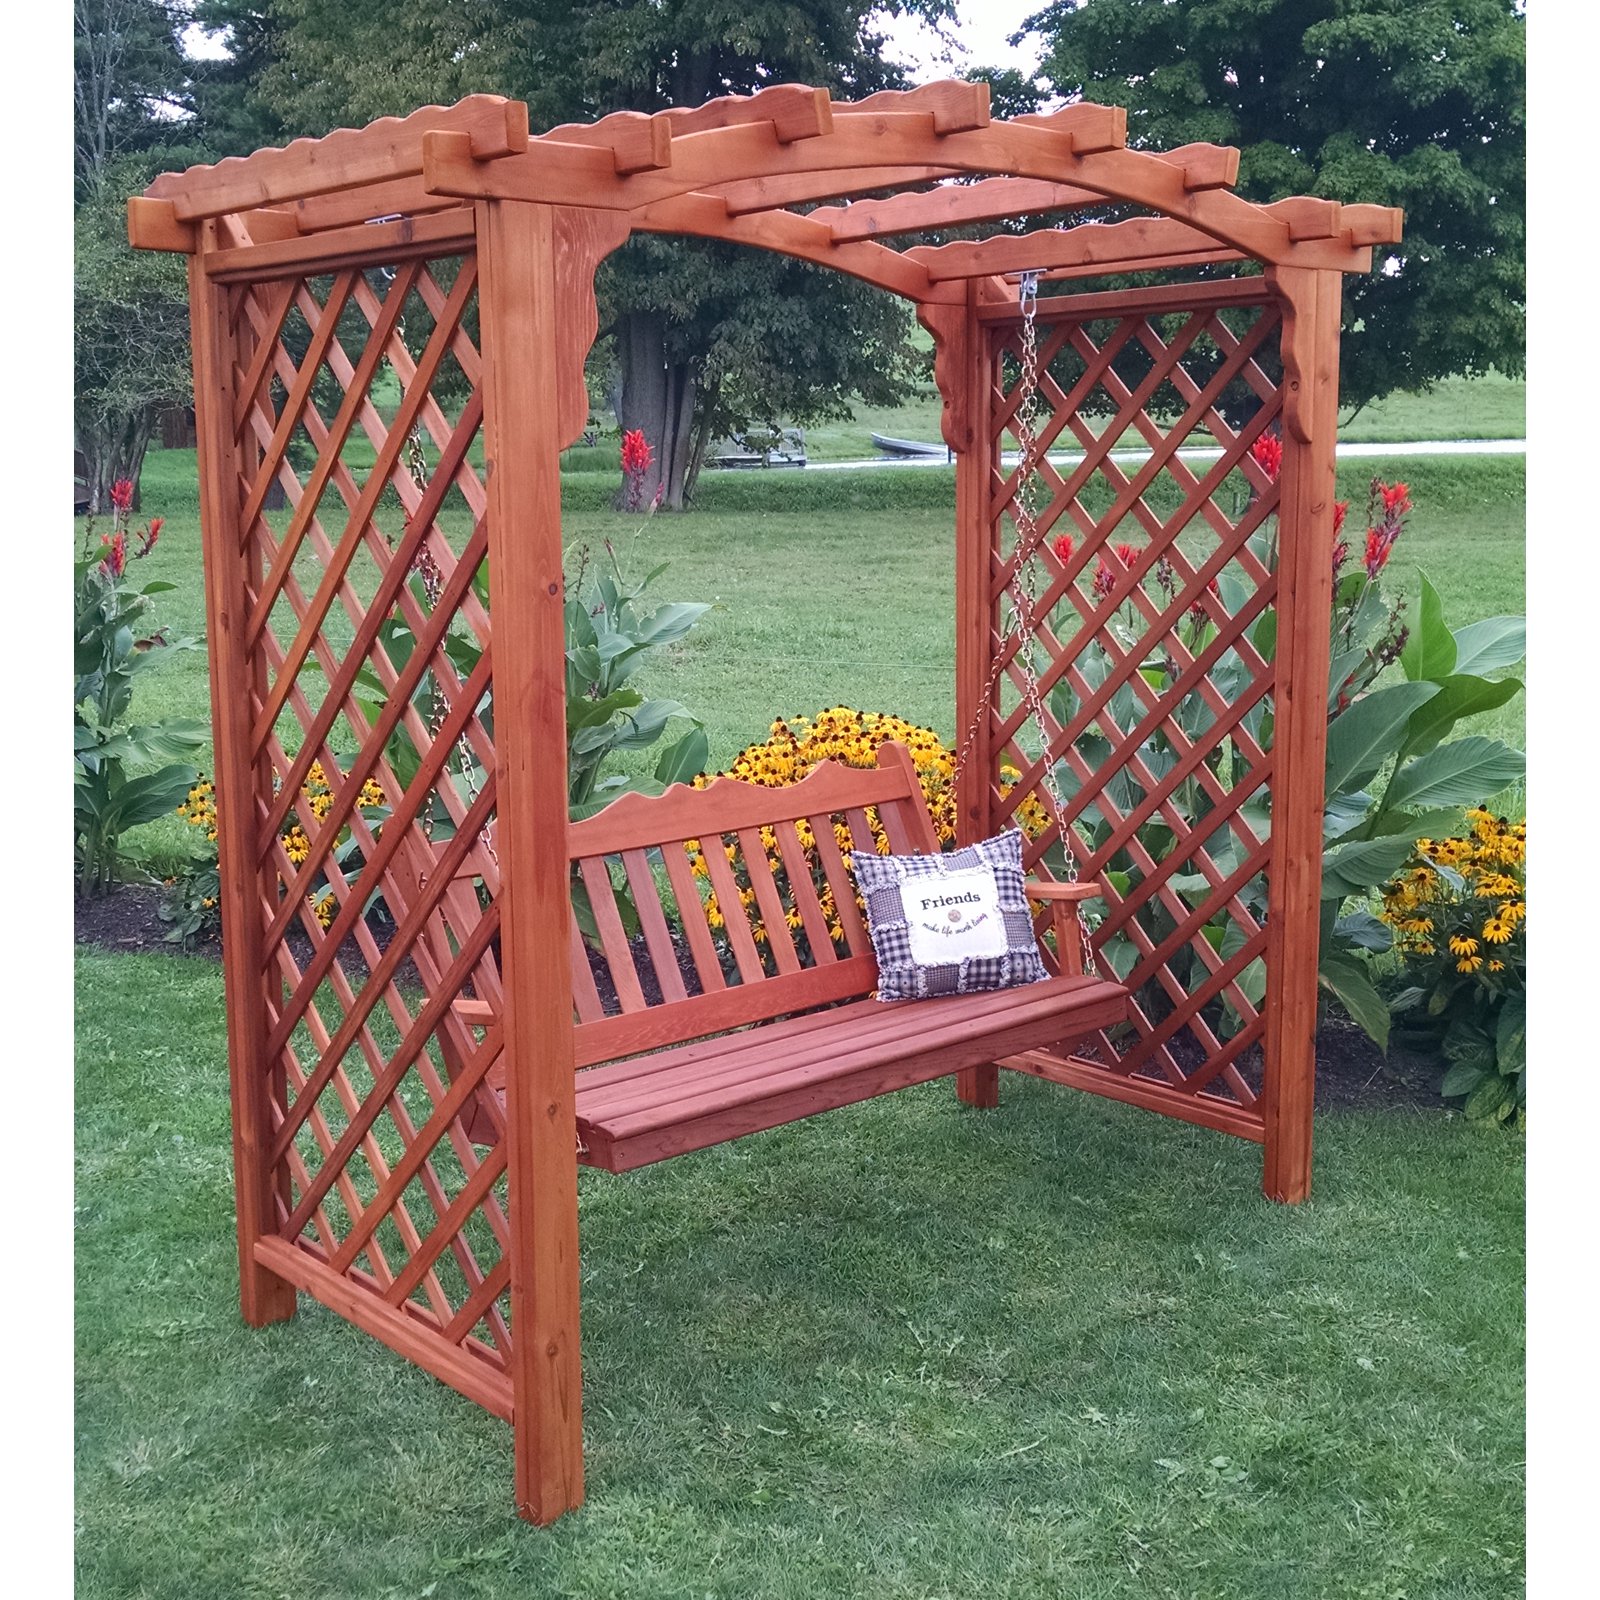 A &amp; L Furniture Jamesport 7 ft. High Cedar Arbor with Swing - image 1 of 2